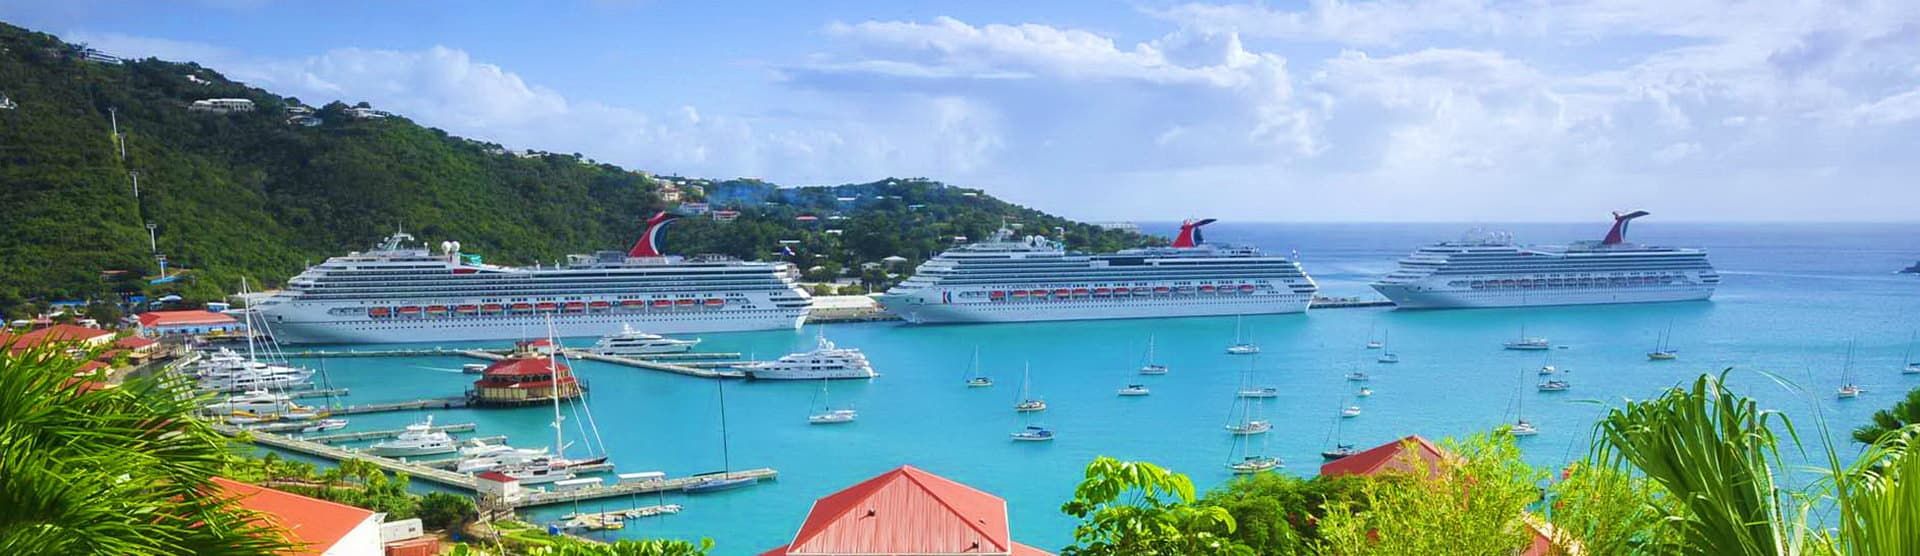 Carnival Cruise Lines